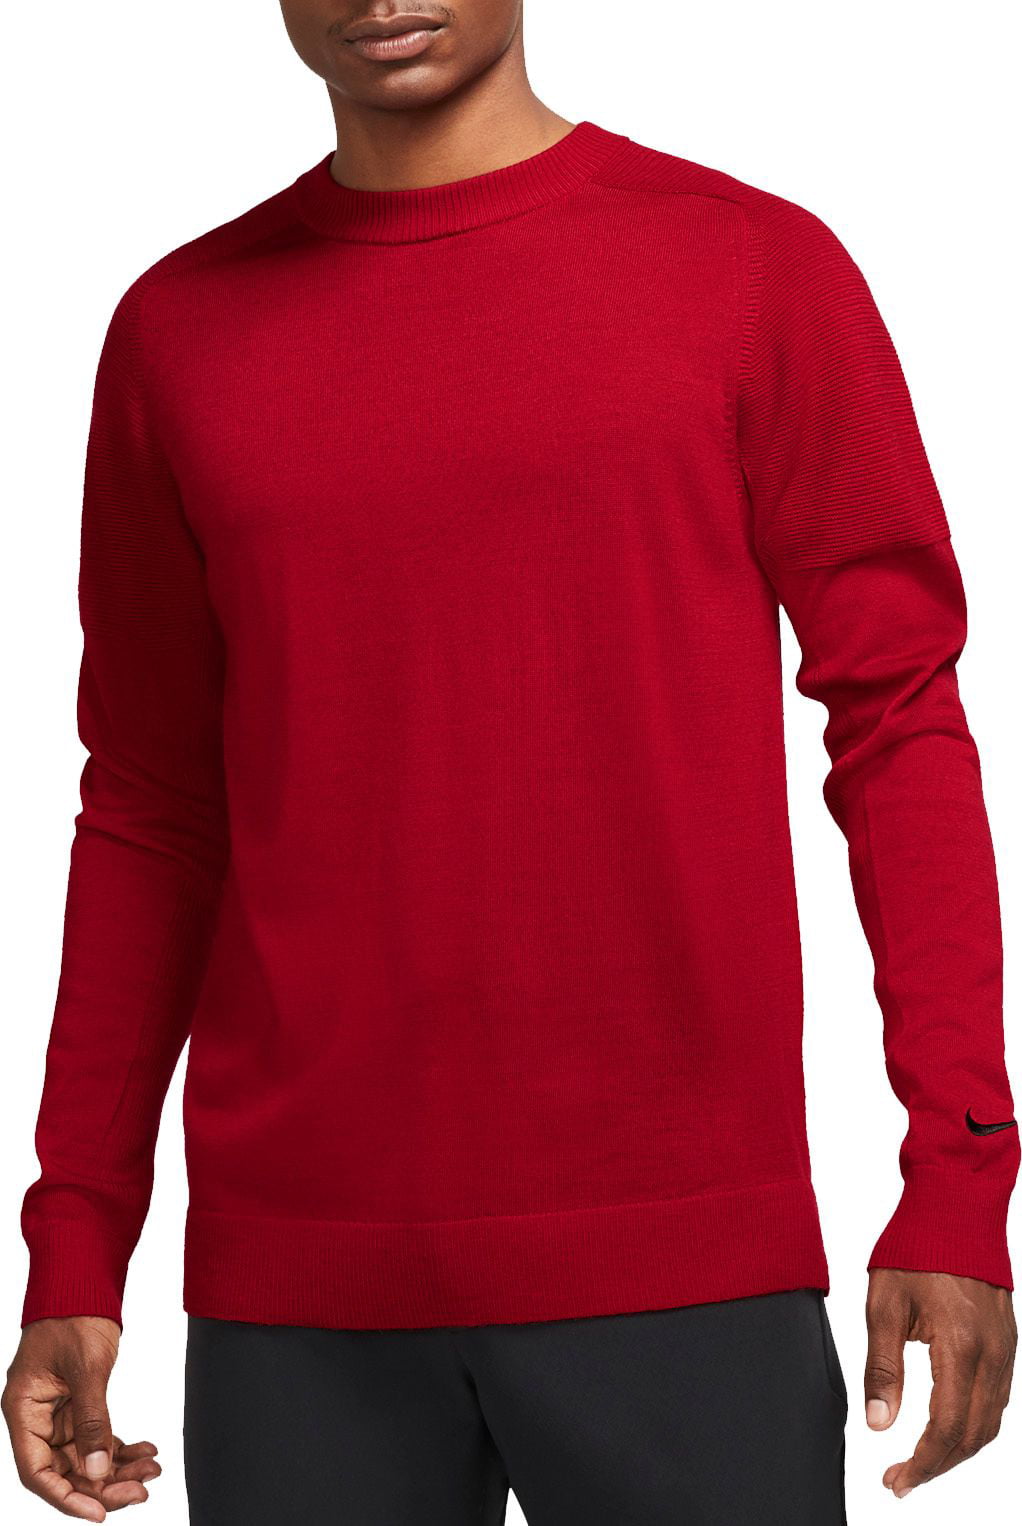 Nike Men's Tiger Woods Knit Golf Sweater, Gym Red, XL